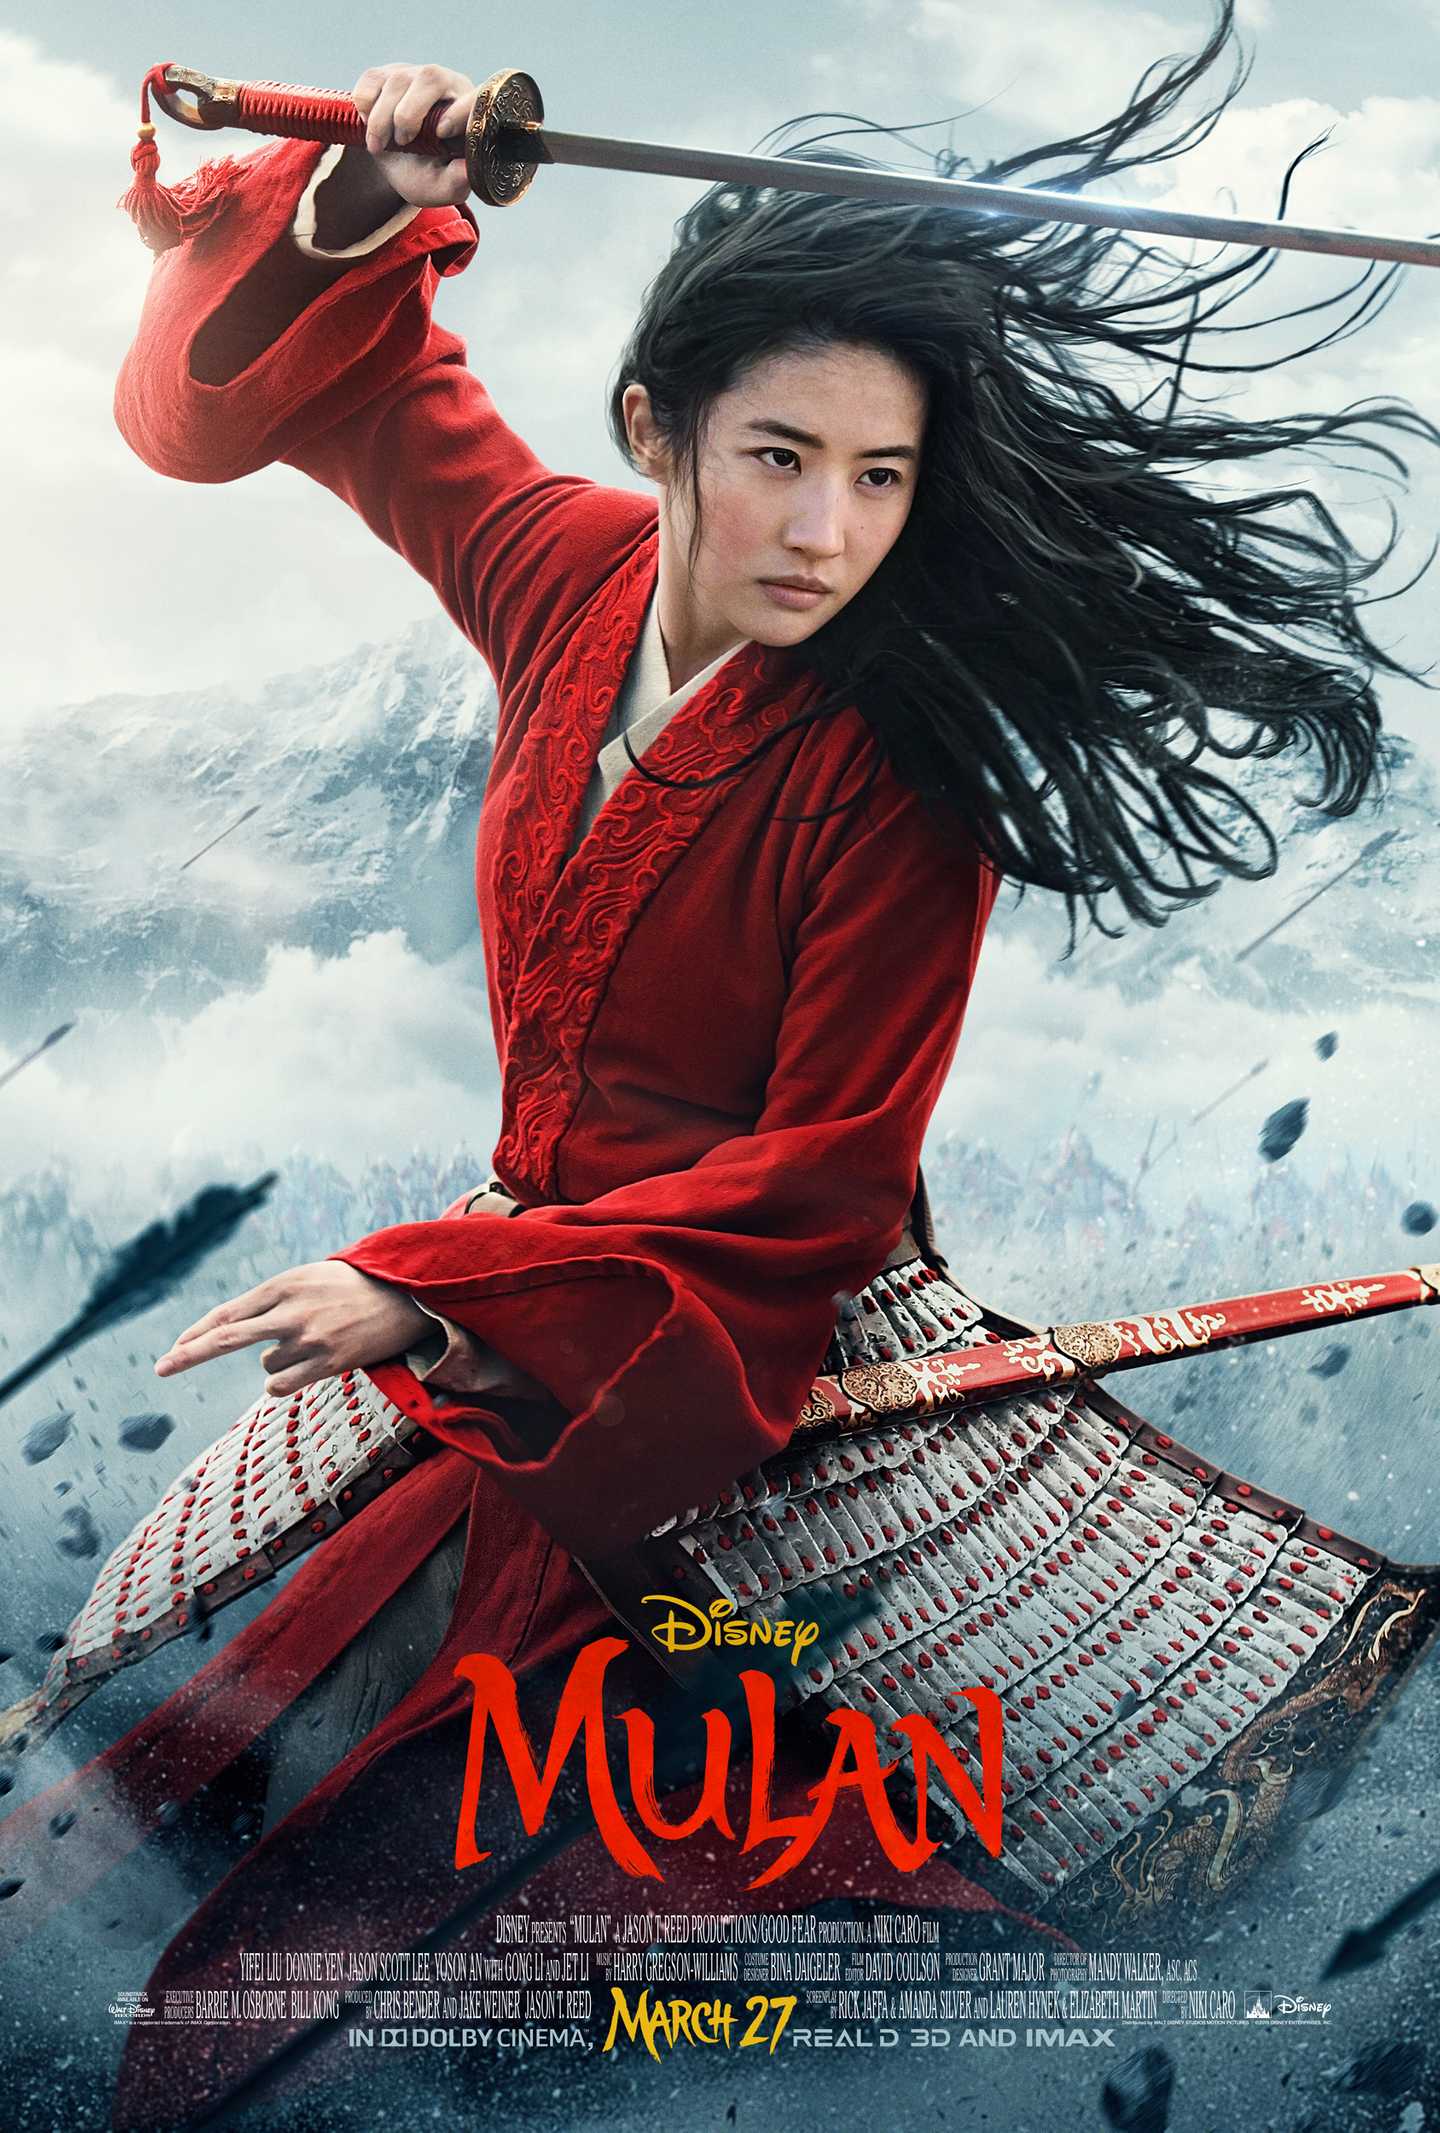 Twitter Reacts To Li Shang Not Appearing In Mulan Because Of Metoo